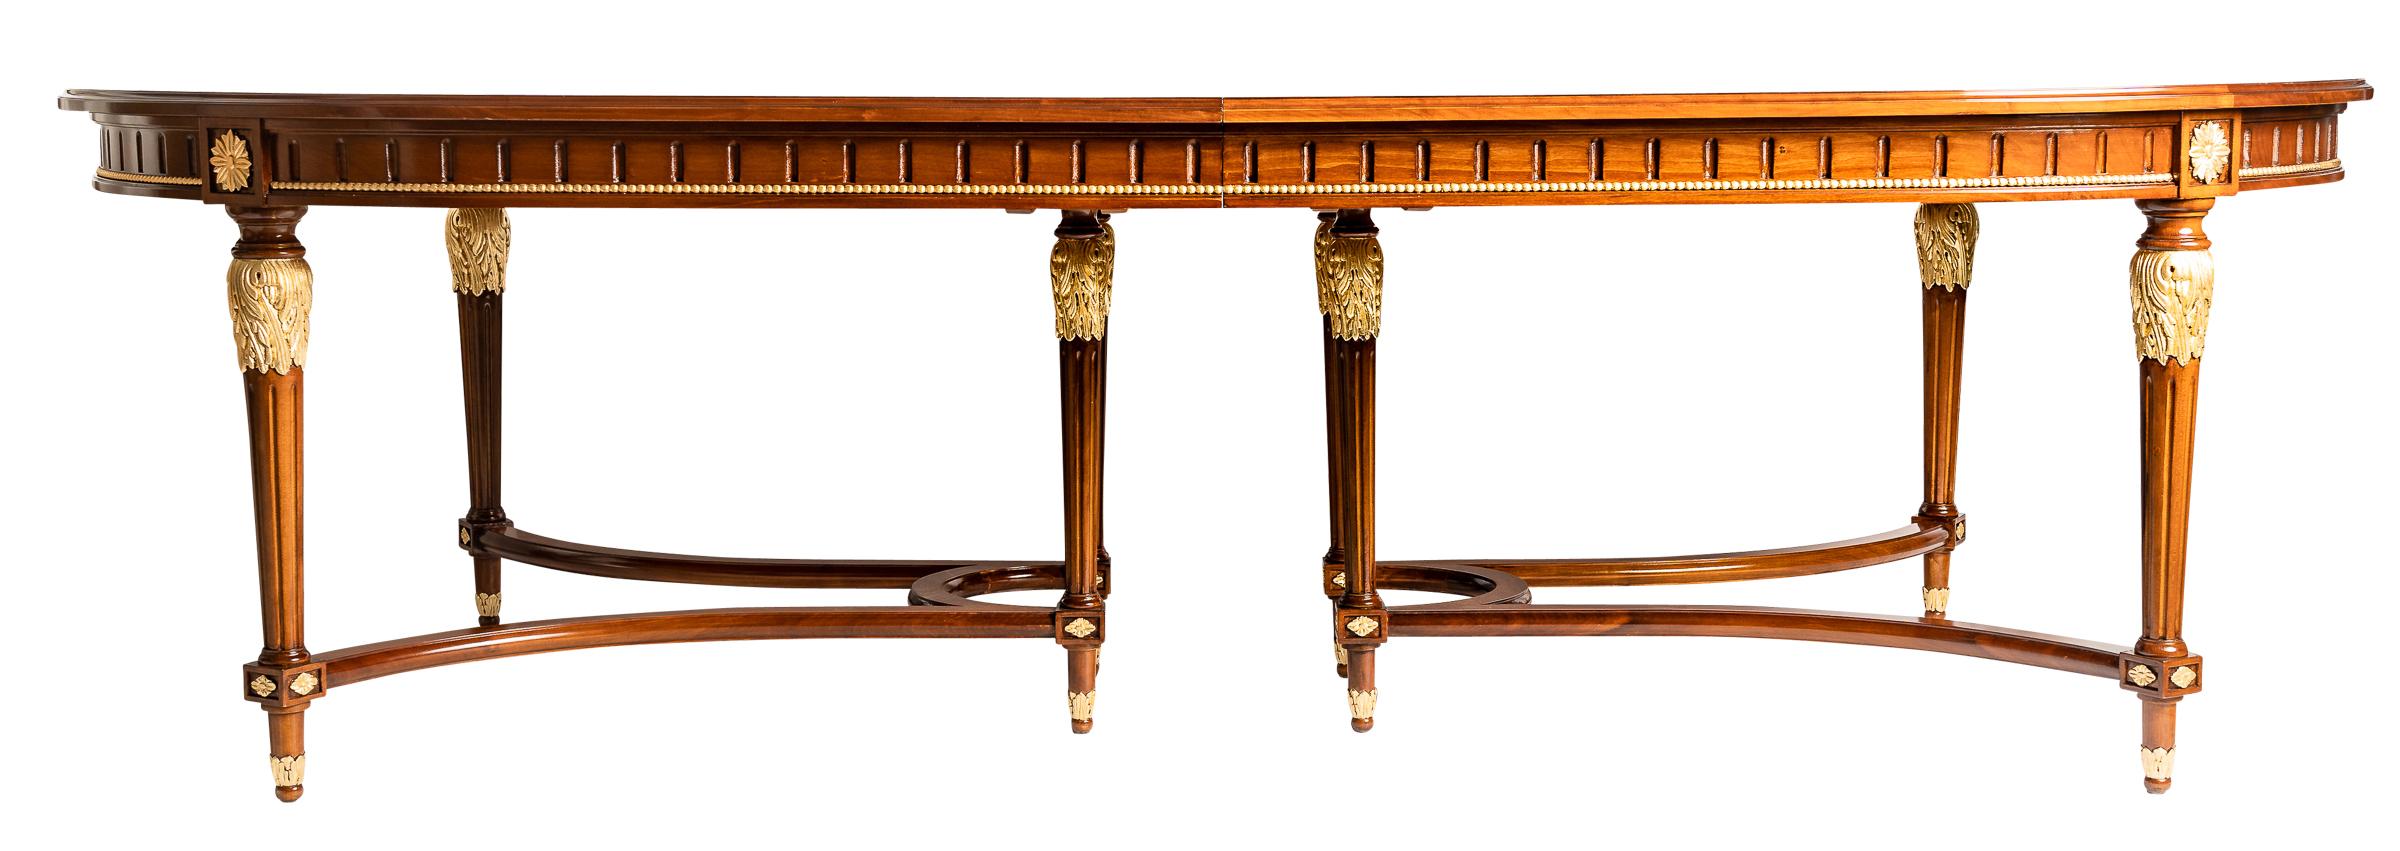 Italian French 19th Century Louis XVI Style Cherry Dining Table with Two Extensions